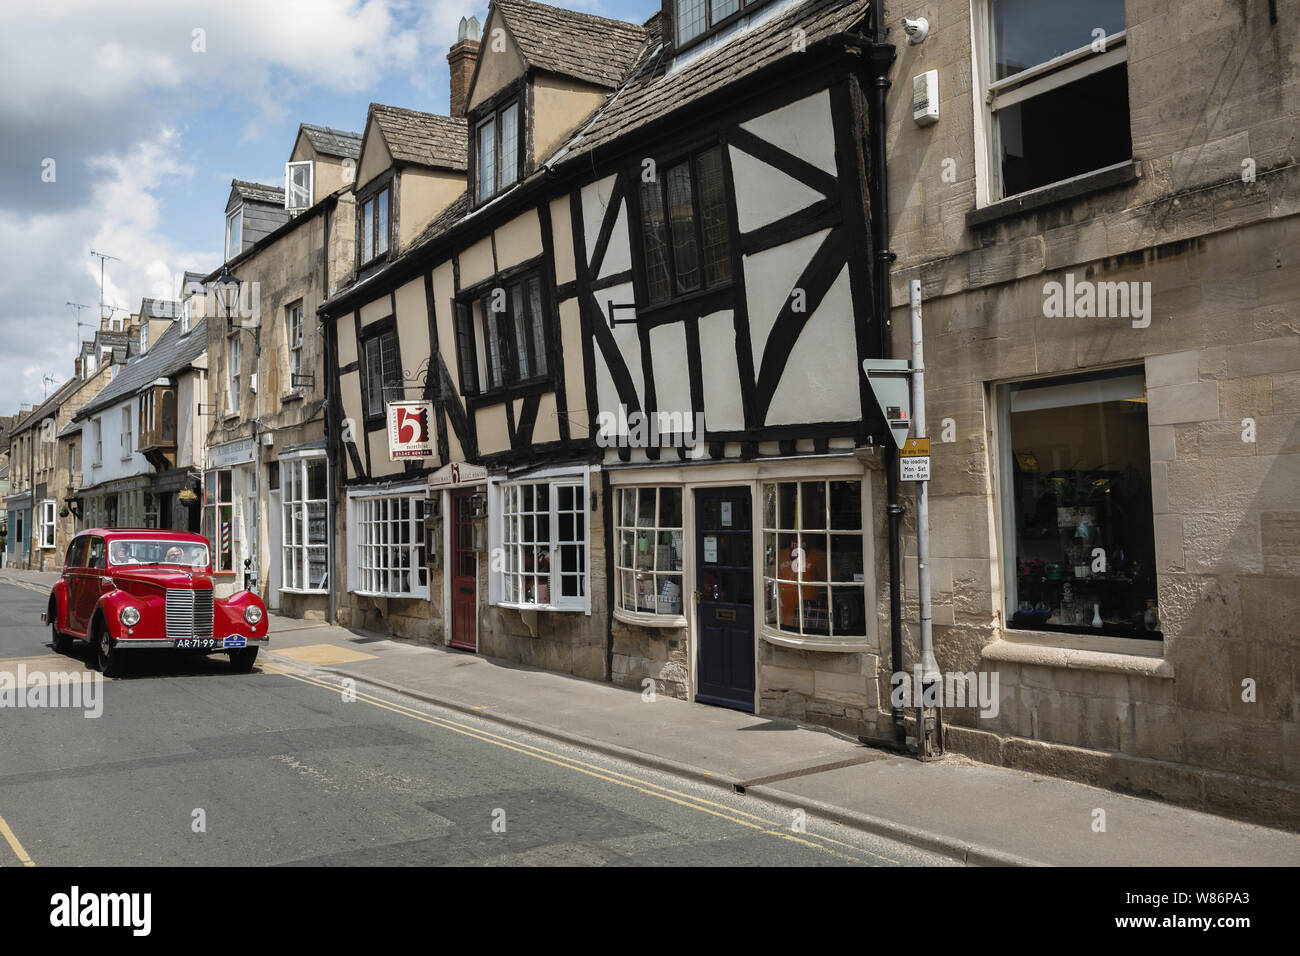 Vintage car, Shops and local businesses. Cotswold street scene. Winchcombe, Gloucestershire Stock Photo